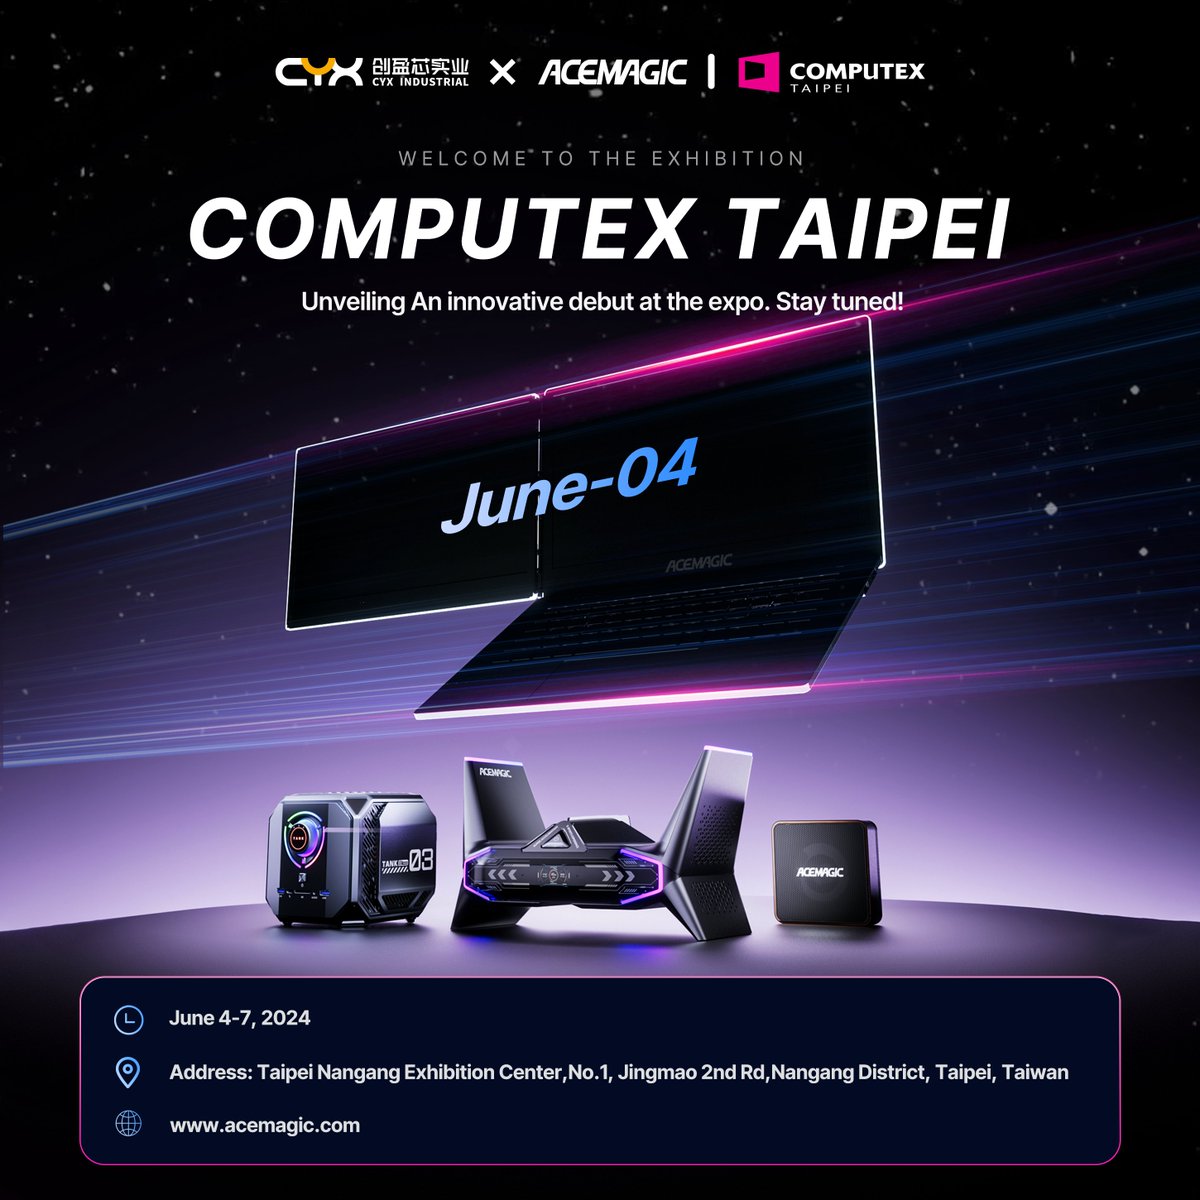 #ACEMAGICPC is excited to participate in the upcoming #COMPUTEX2024! 🖥️🚀⚡
Get ready to explore our latest mini PCs and... an Innovative New Product!🤫😲🔥
You're cordially invited!
📅 June 4-7, 2024
📍 Booth #N1244, Taipei Nangang Exhibition Center,No.1, Jingmao 2nd Rd,Nangang